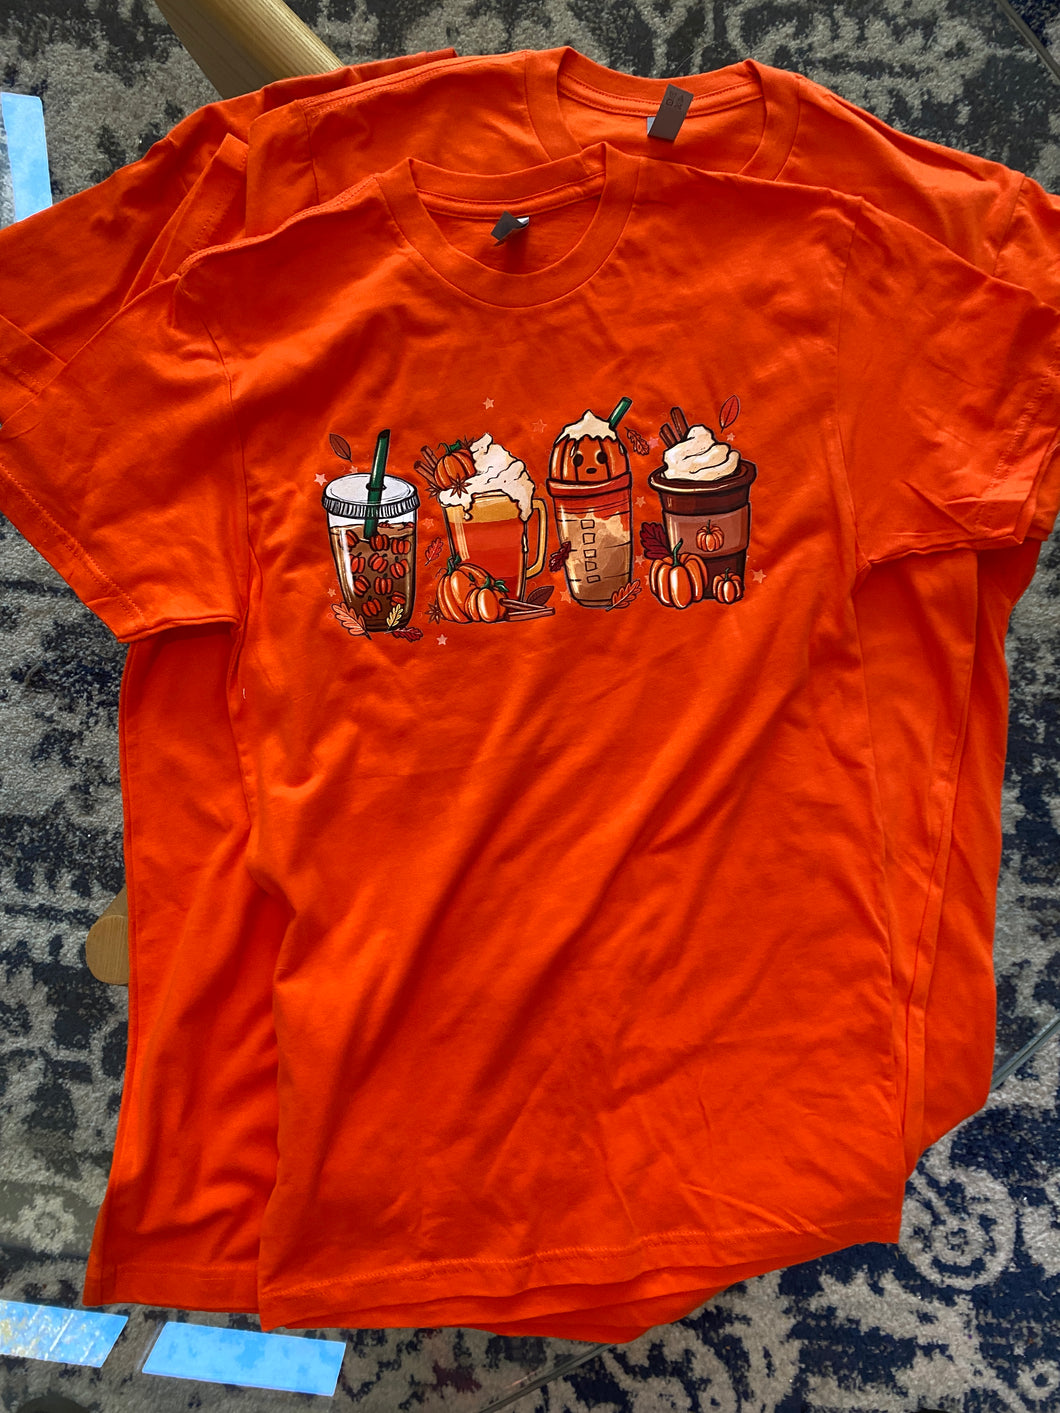 T Shirt Orange 100% Cotton for Fall with Pumpkin Spice Coffee Drinks Designs